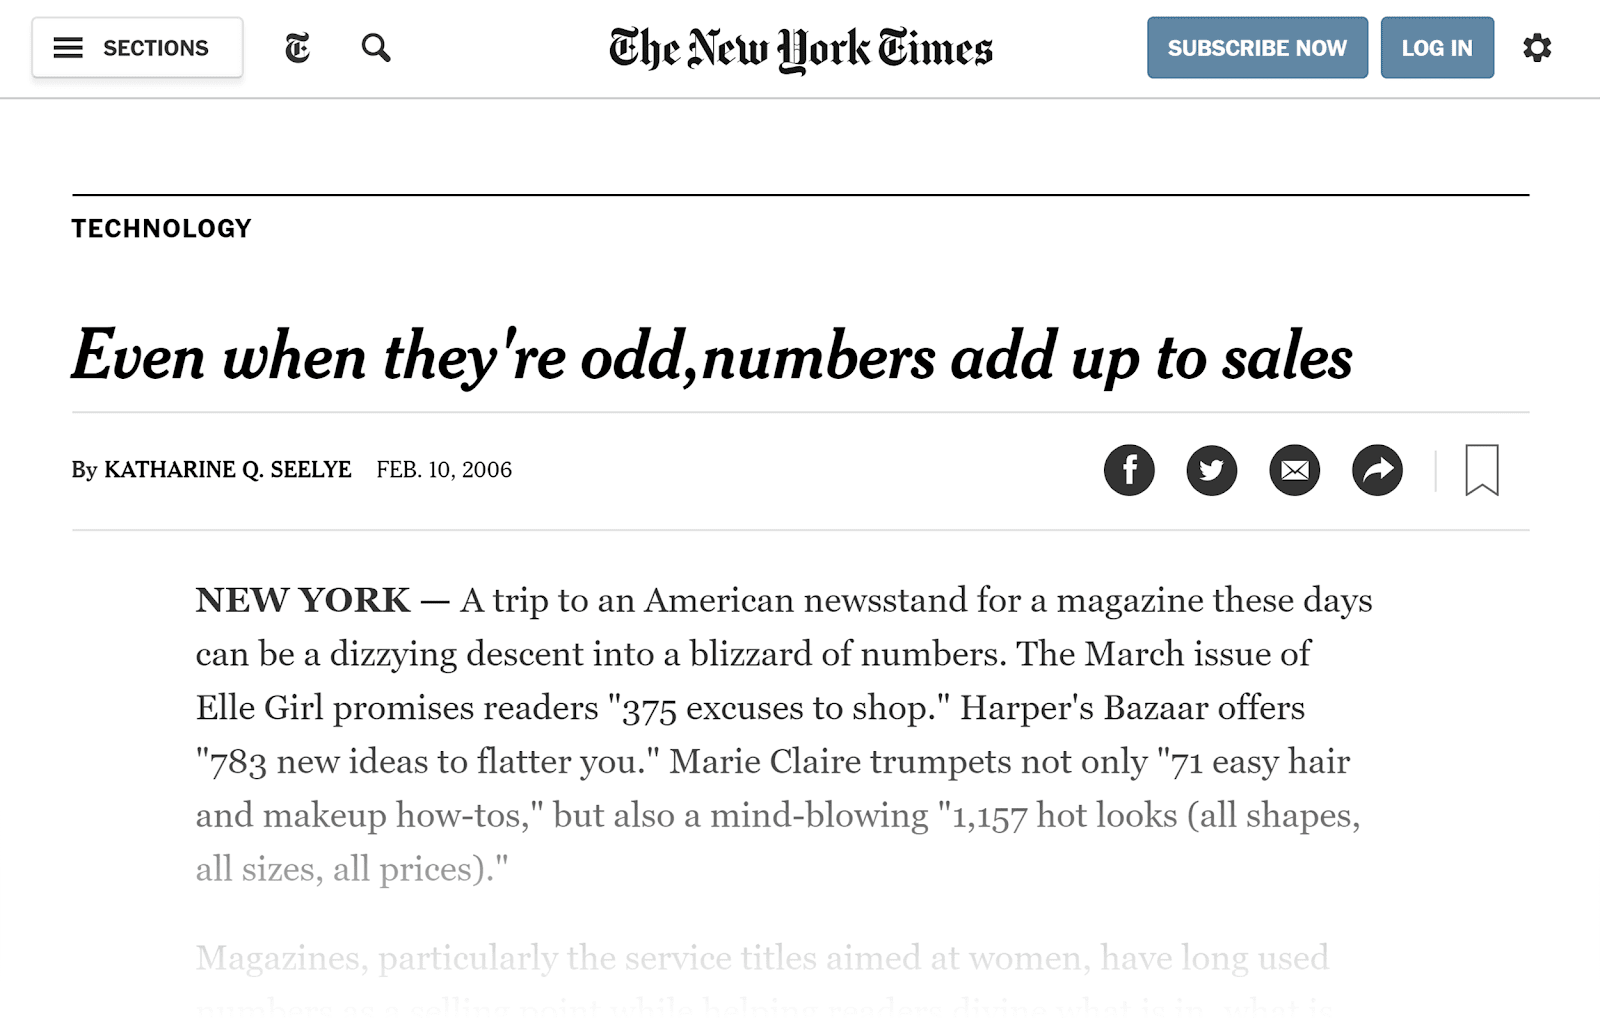 NY Times – Numbers post